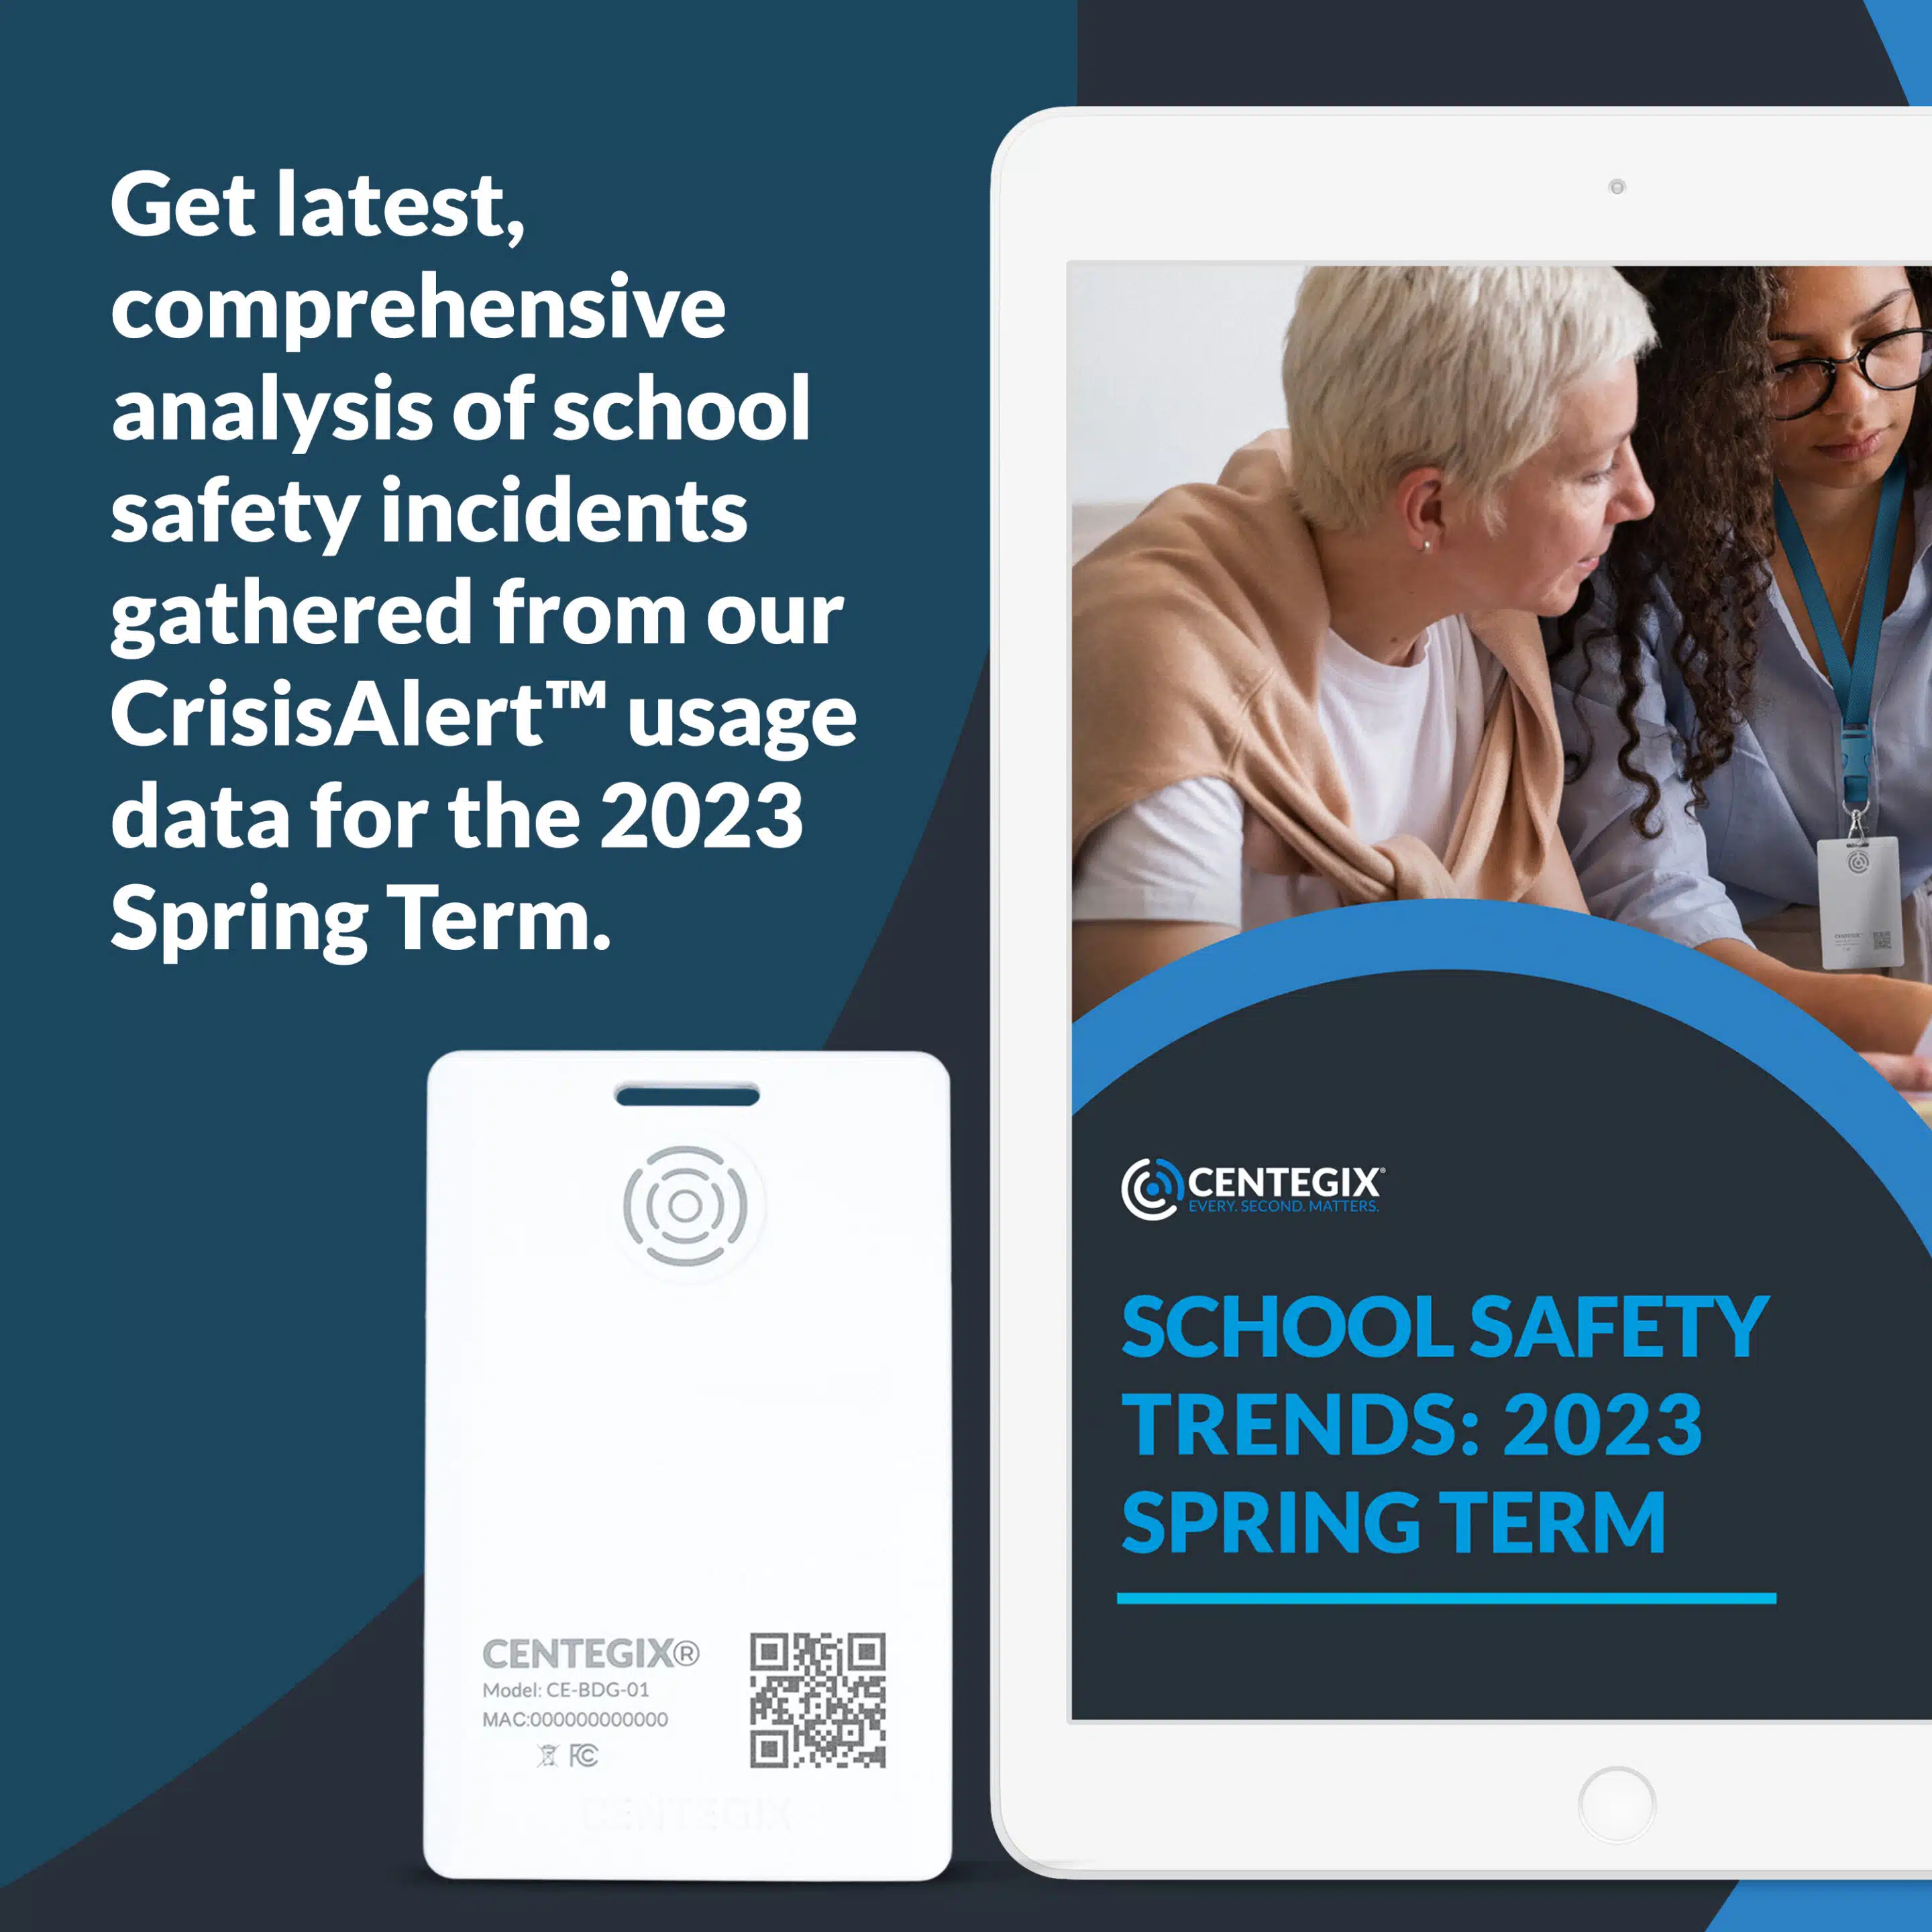 Get latest comprehensive analysis of school safety incidents gathered from our CrisisAlert usage data for the 2023 Spring Term.